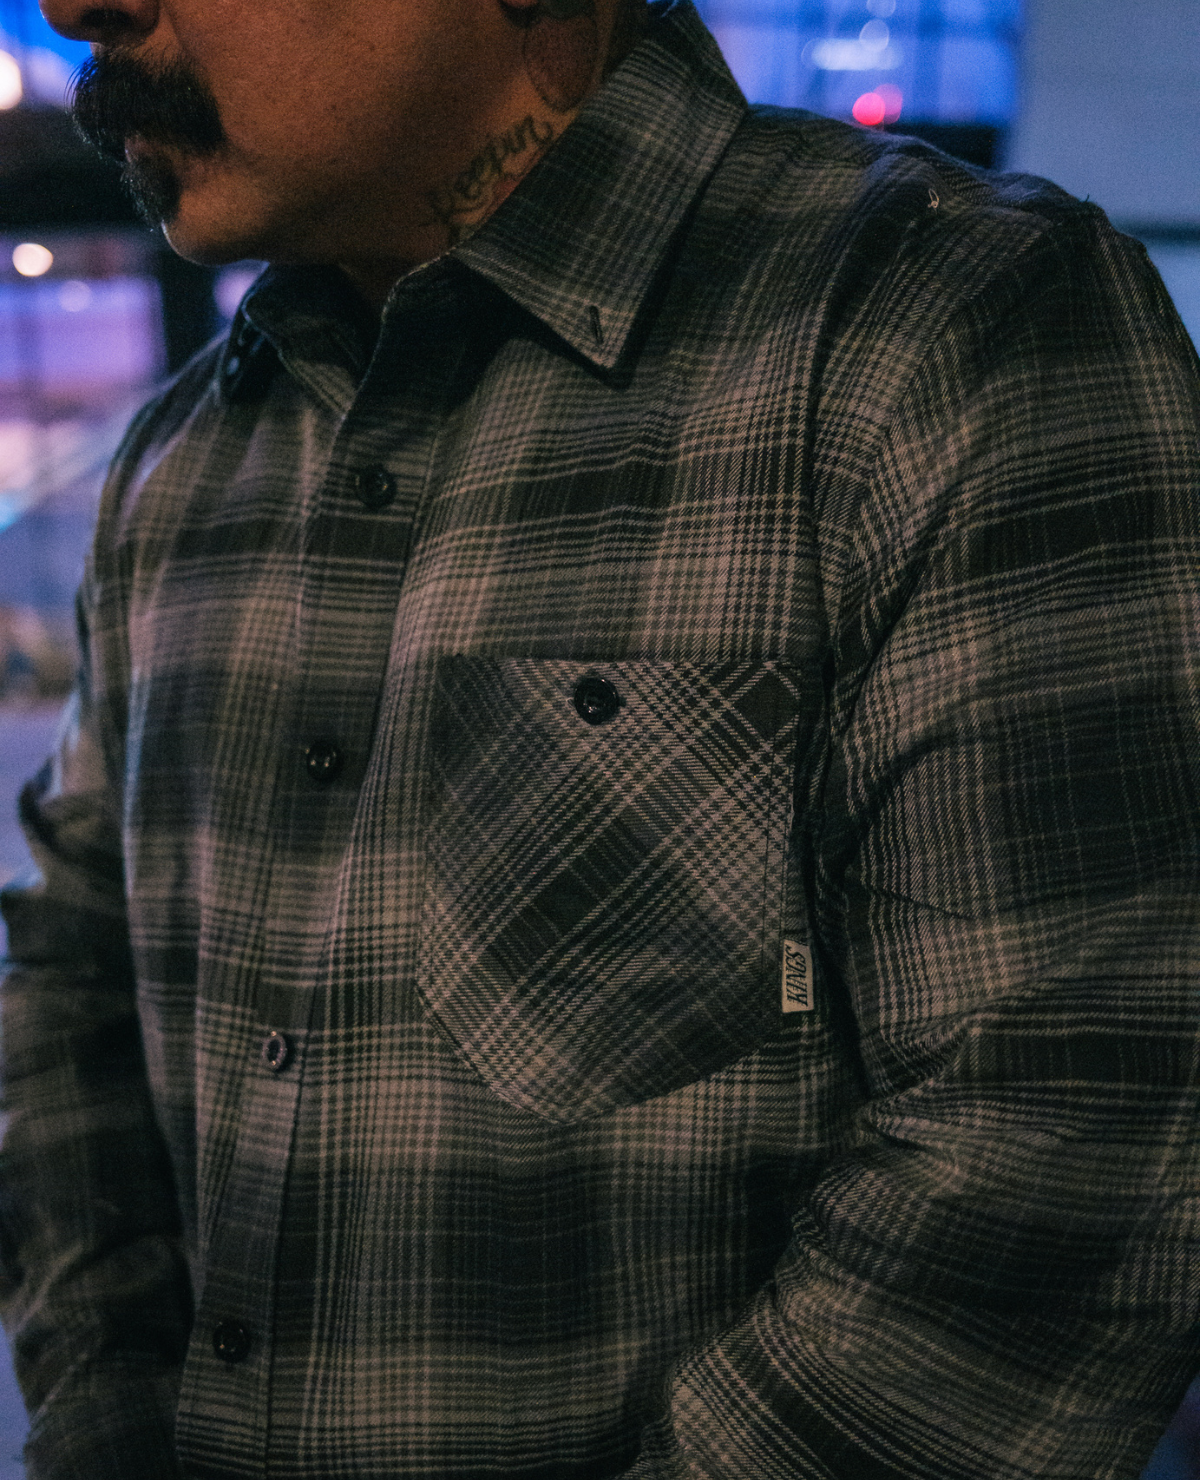 Lifetipsforbetterliving Hockey Clothing apparel company - partnership with the Los Angeles Kings NHL Team - Shop this limited edition flannel